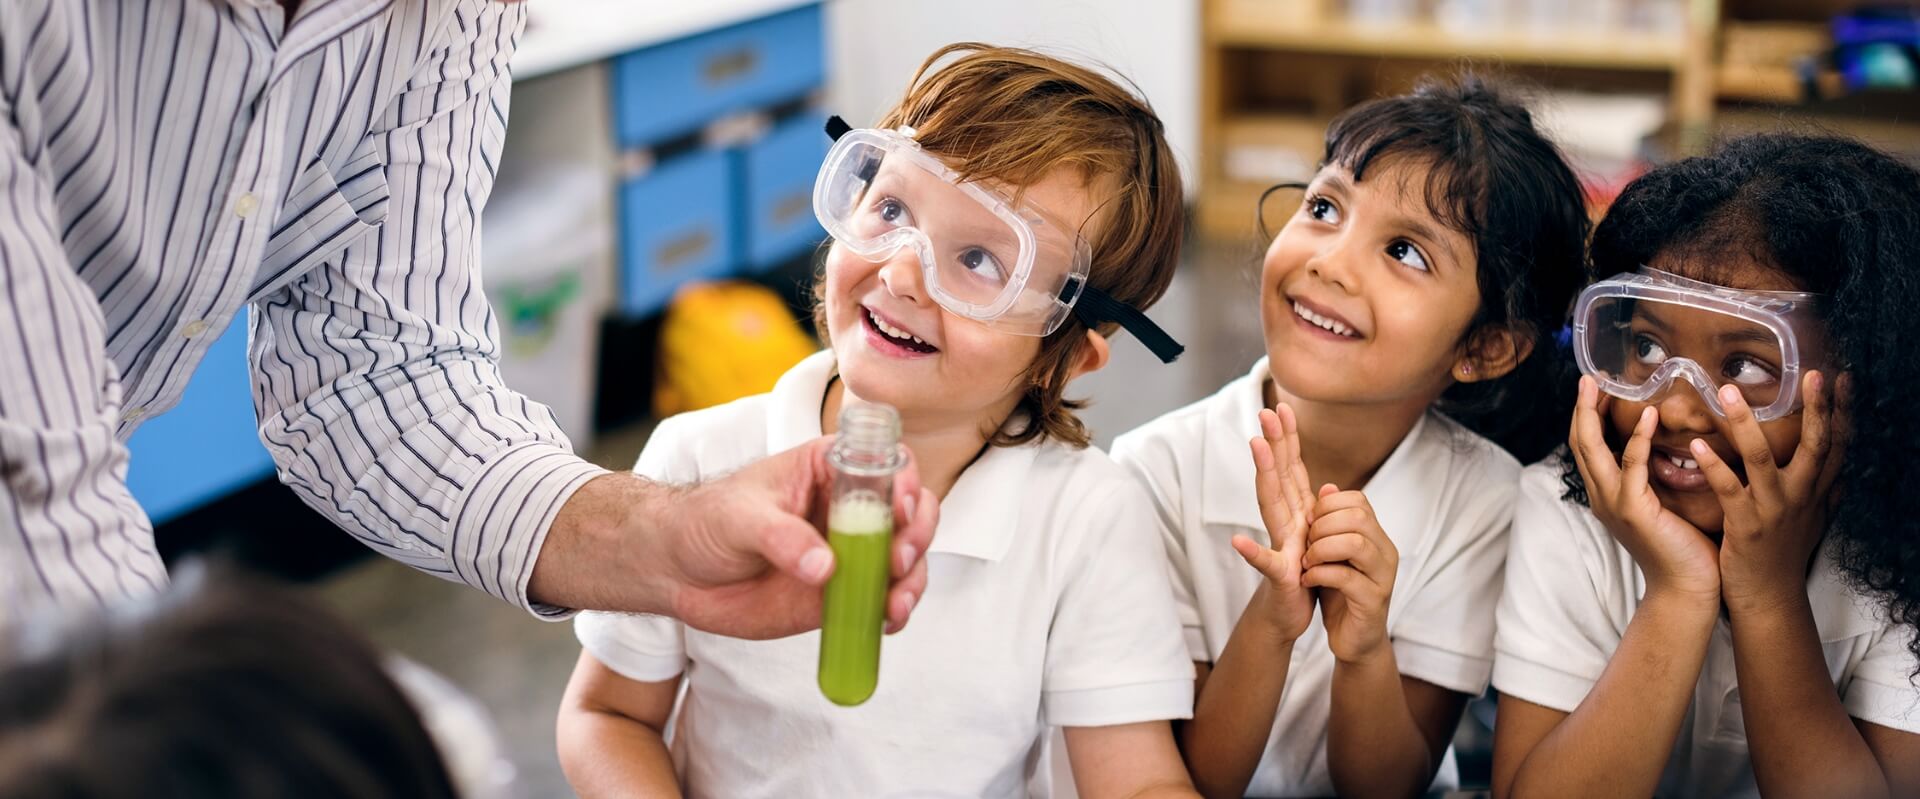 Small children smiling during a science lesson at school